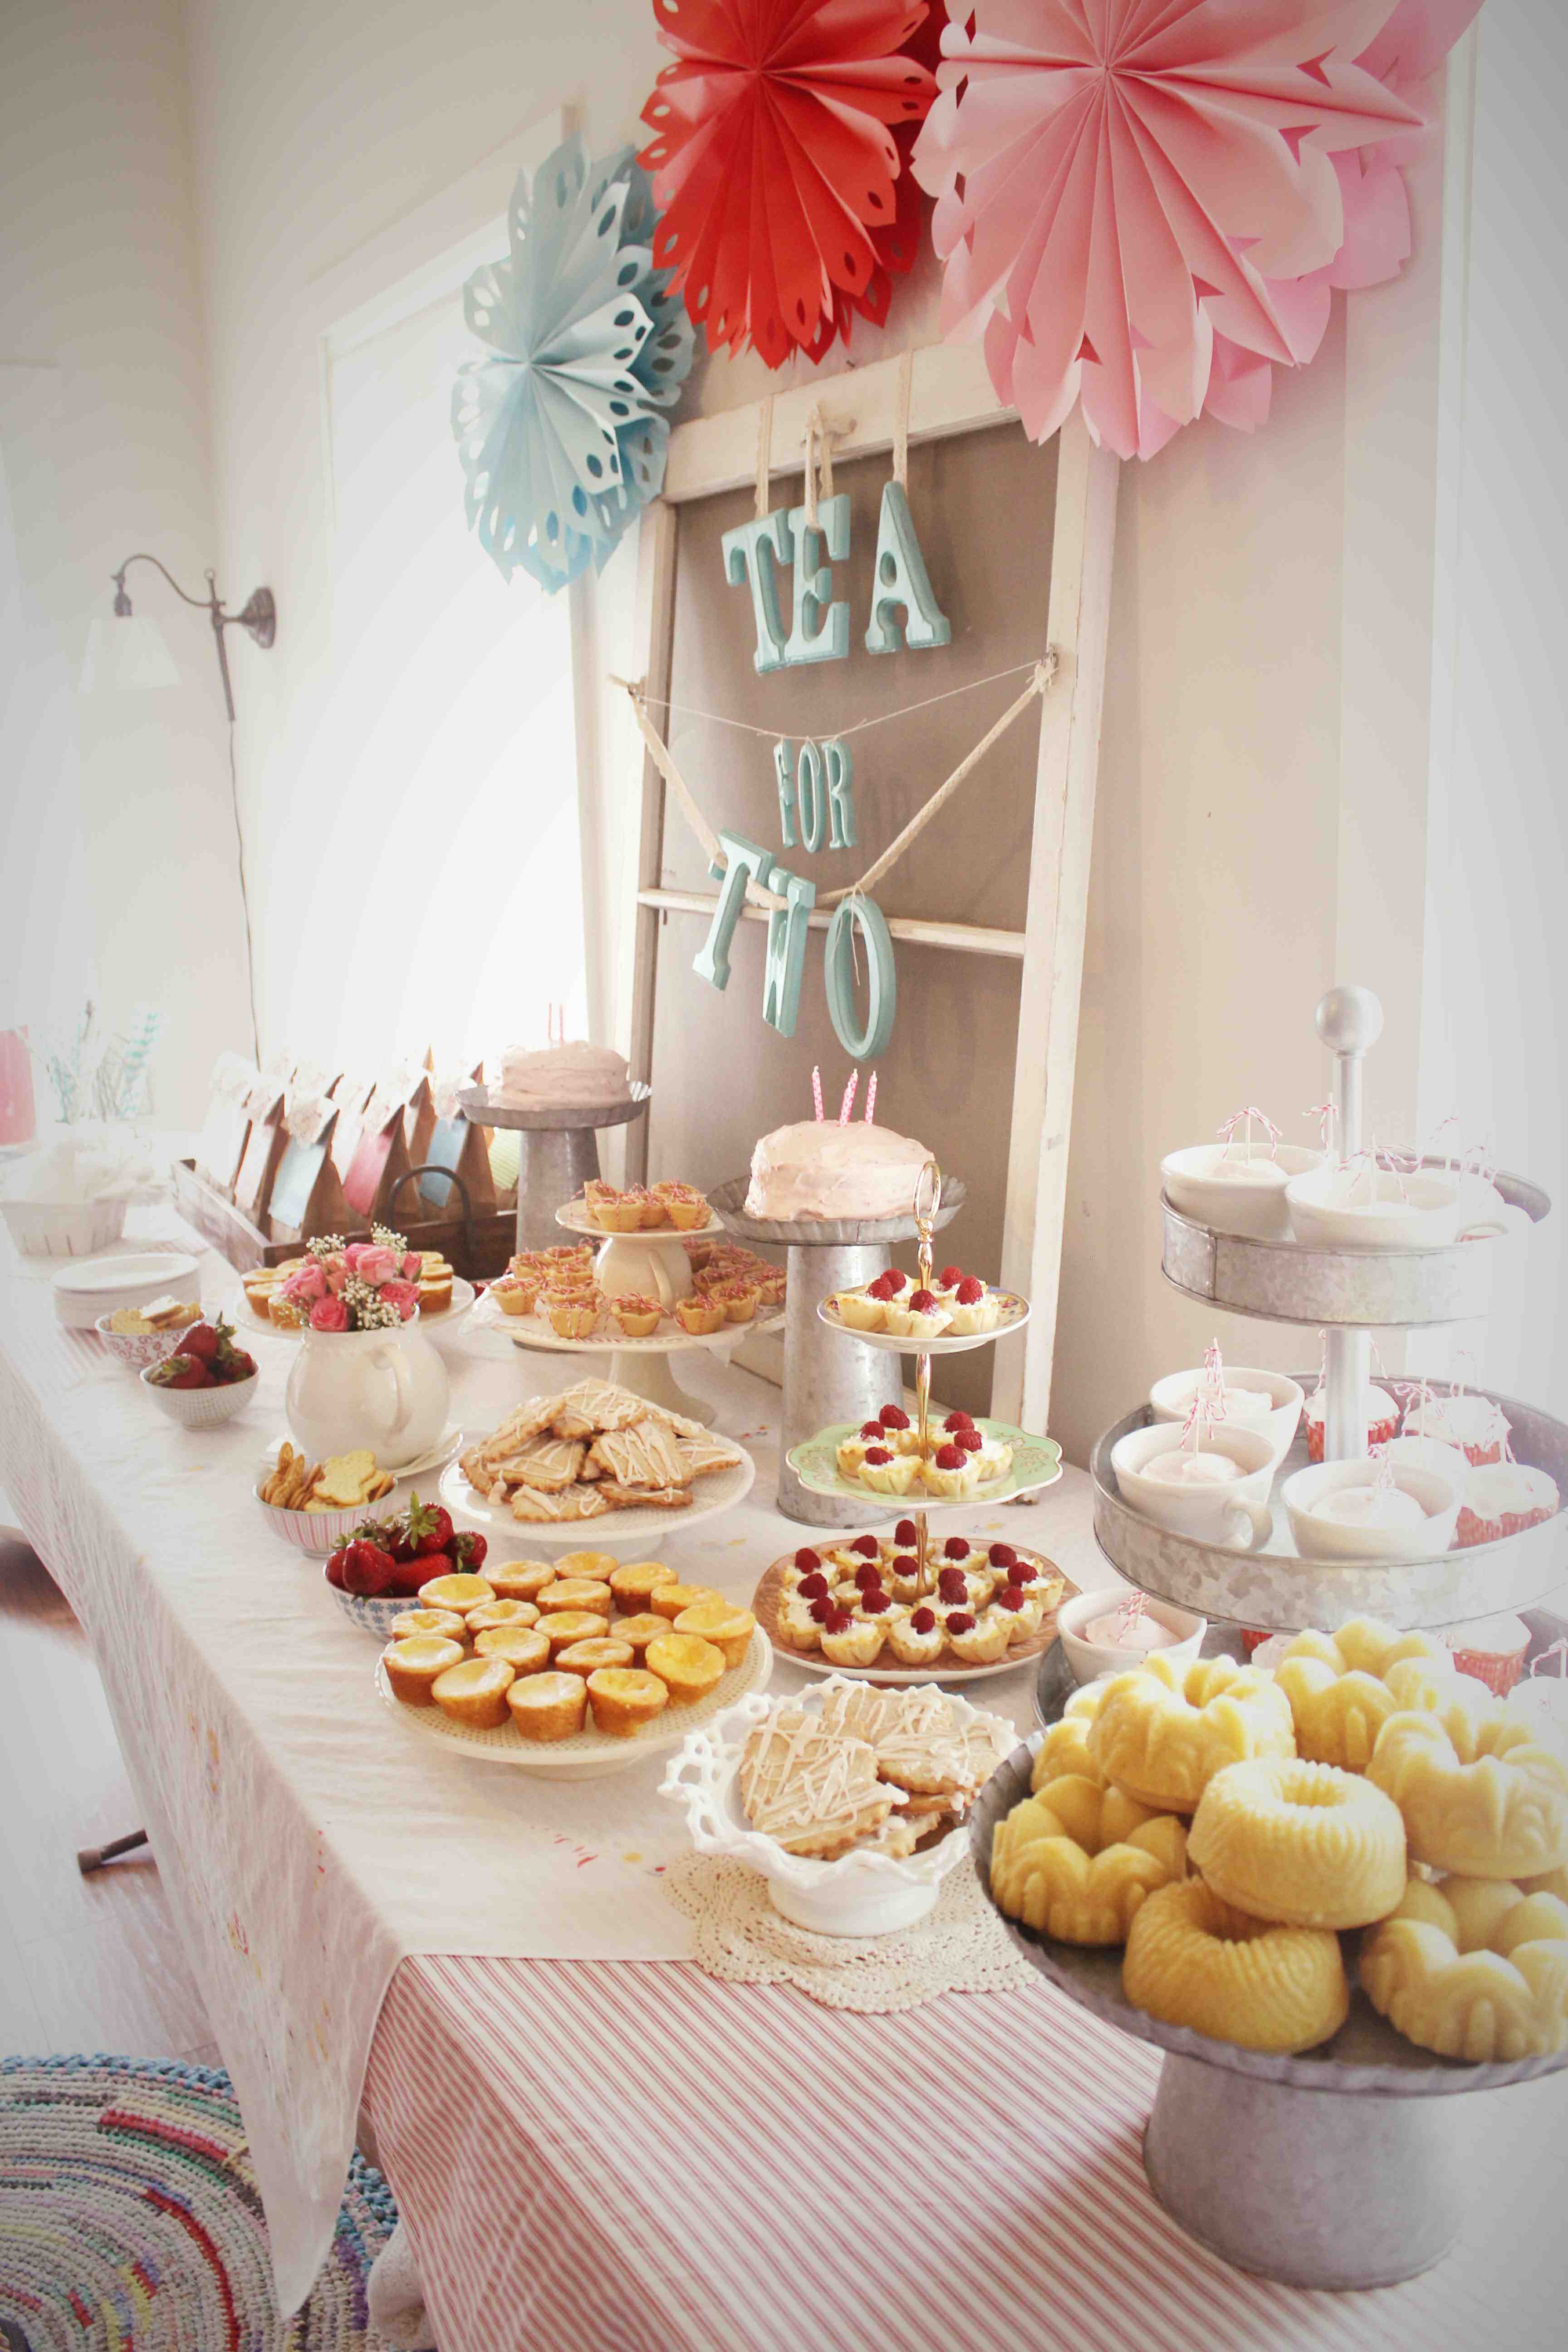 A “Tea For Two” Birthday Party |